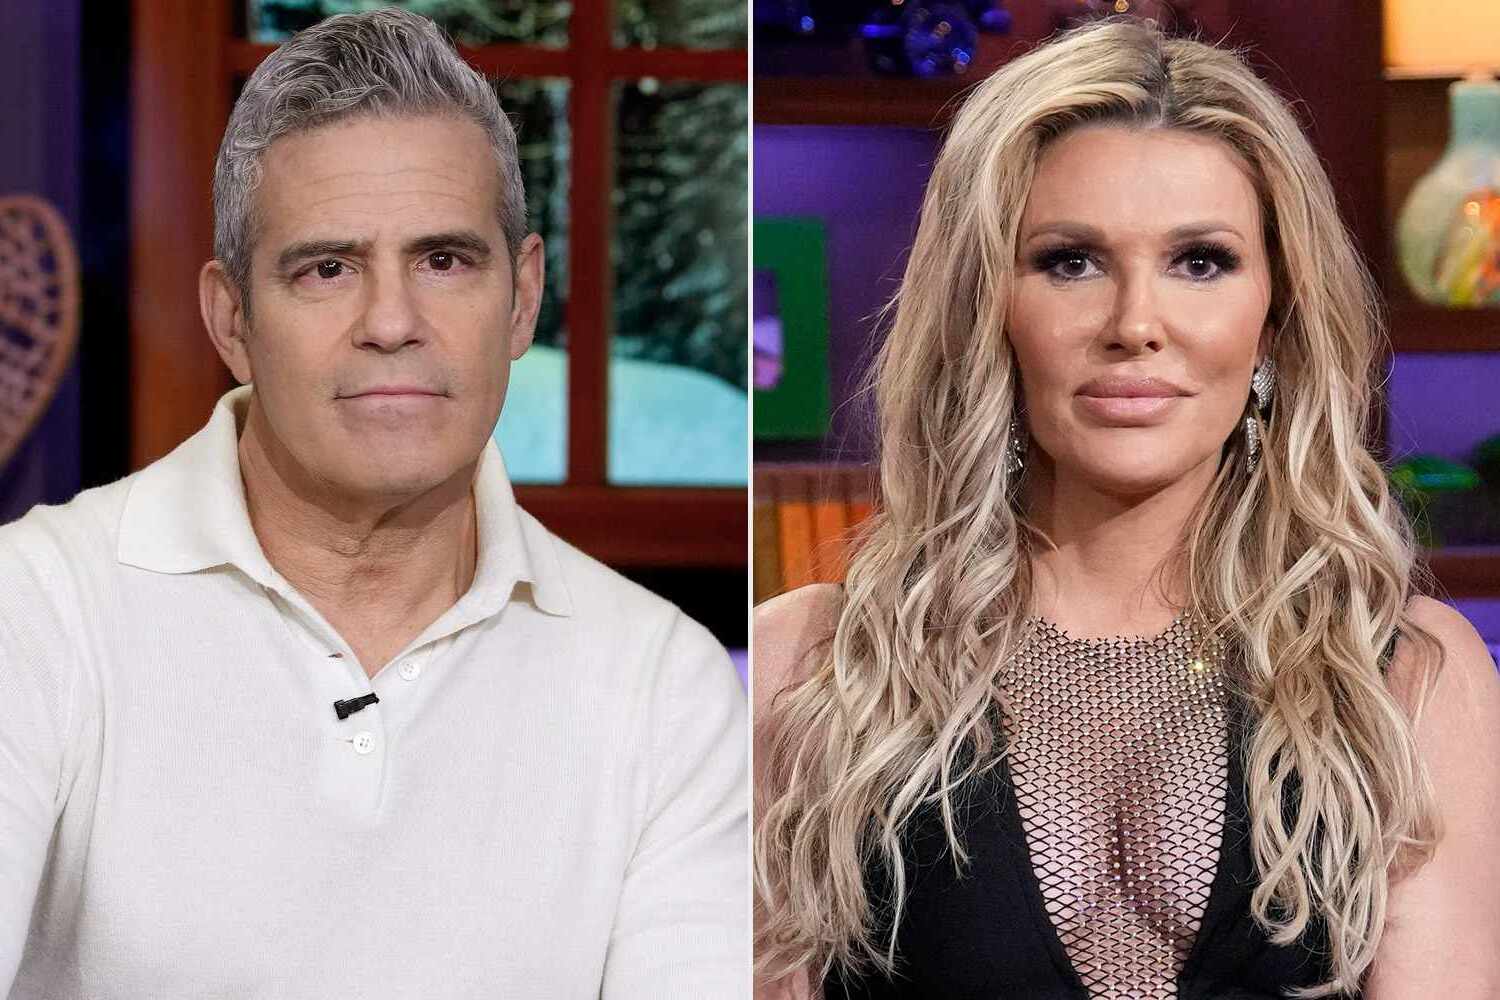 Brandi Glanville Demands Personal Apology From Andy Cohen